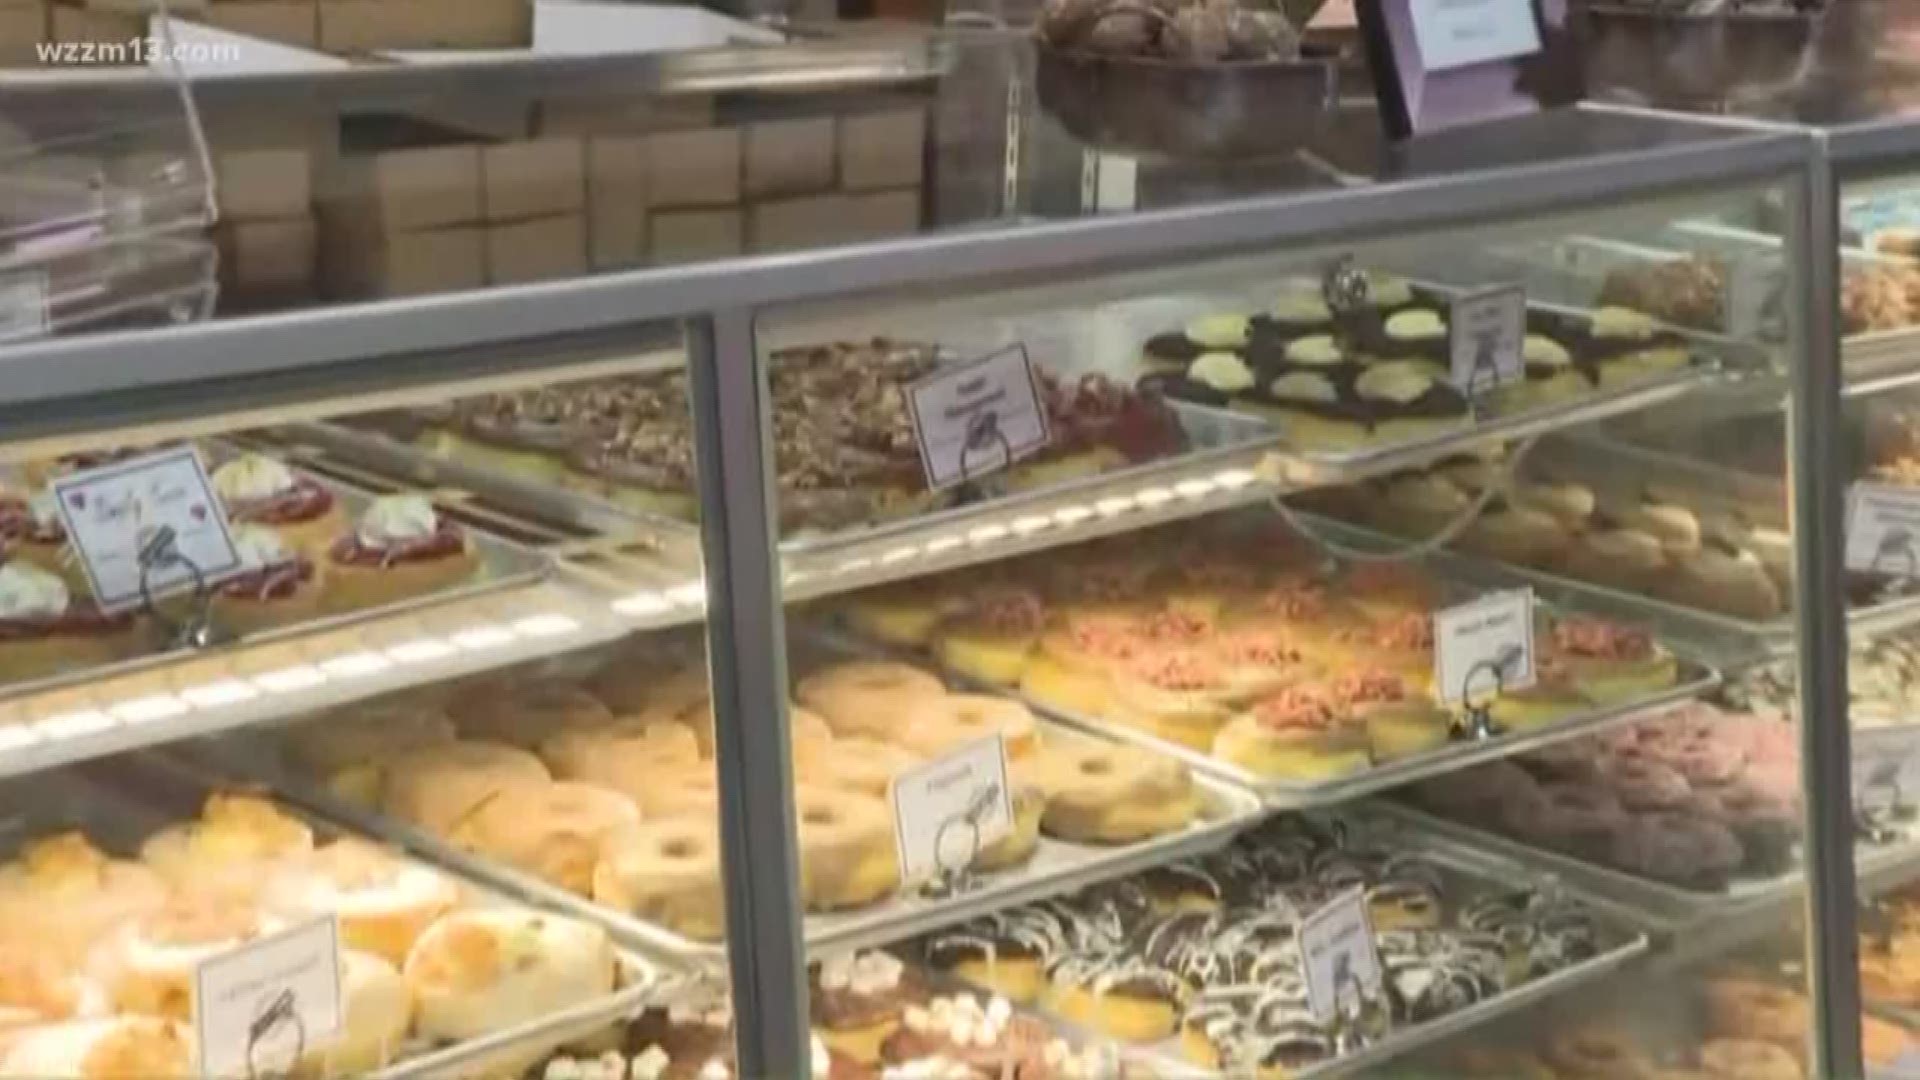 The popular West Michigan donut shop has opening a new location in Grandville -- YUM!